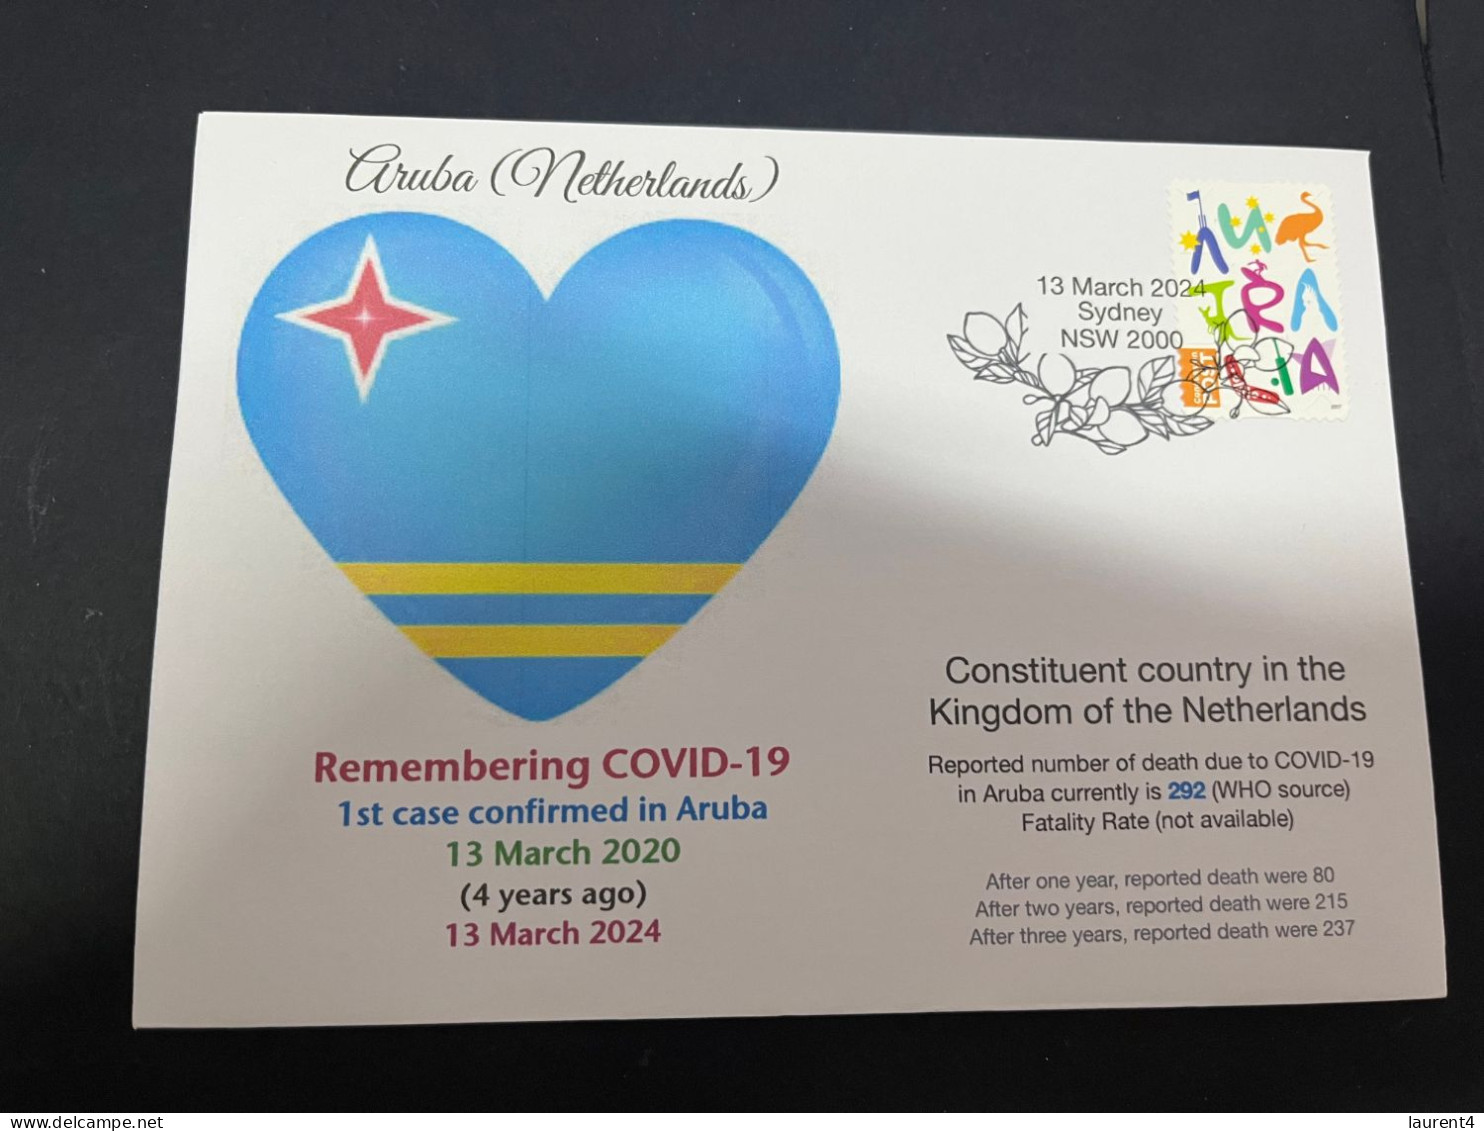 13-3-2024 (2 Y 52) COVID-19 4th Anniversary - Aruba (Netherlands) - 13 March 2024 (with Australian Stamp) - Disease